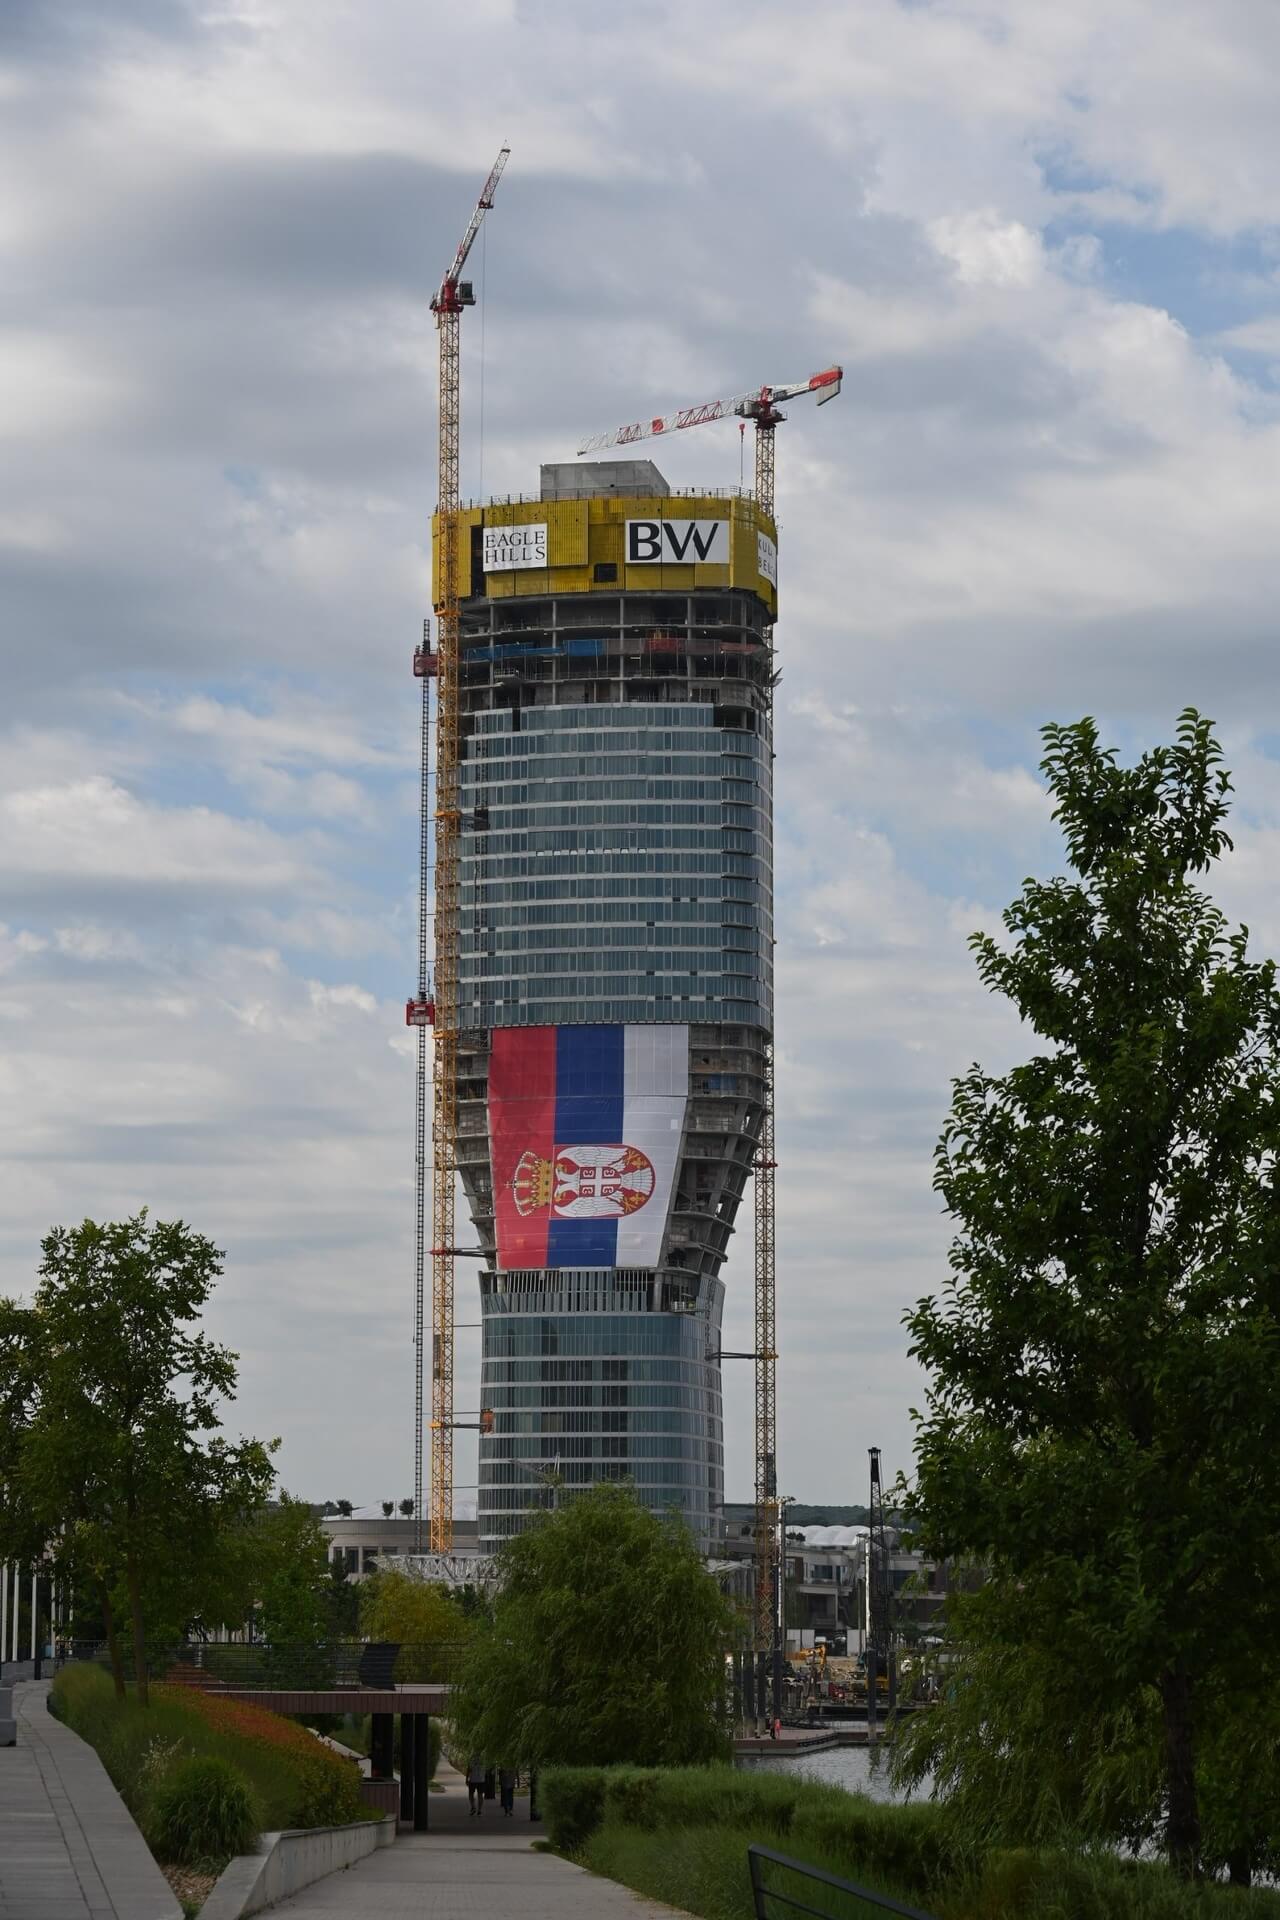 Structural works completed on Kula Belgrade, the tallest building in the region